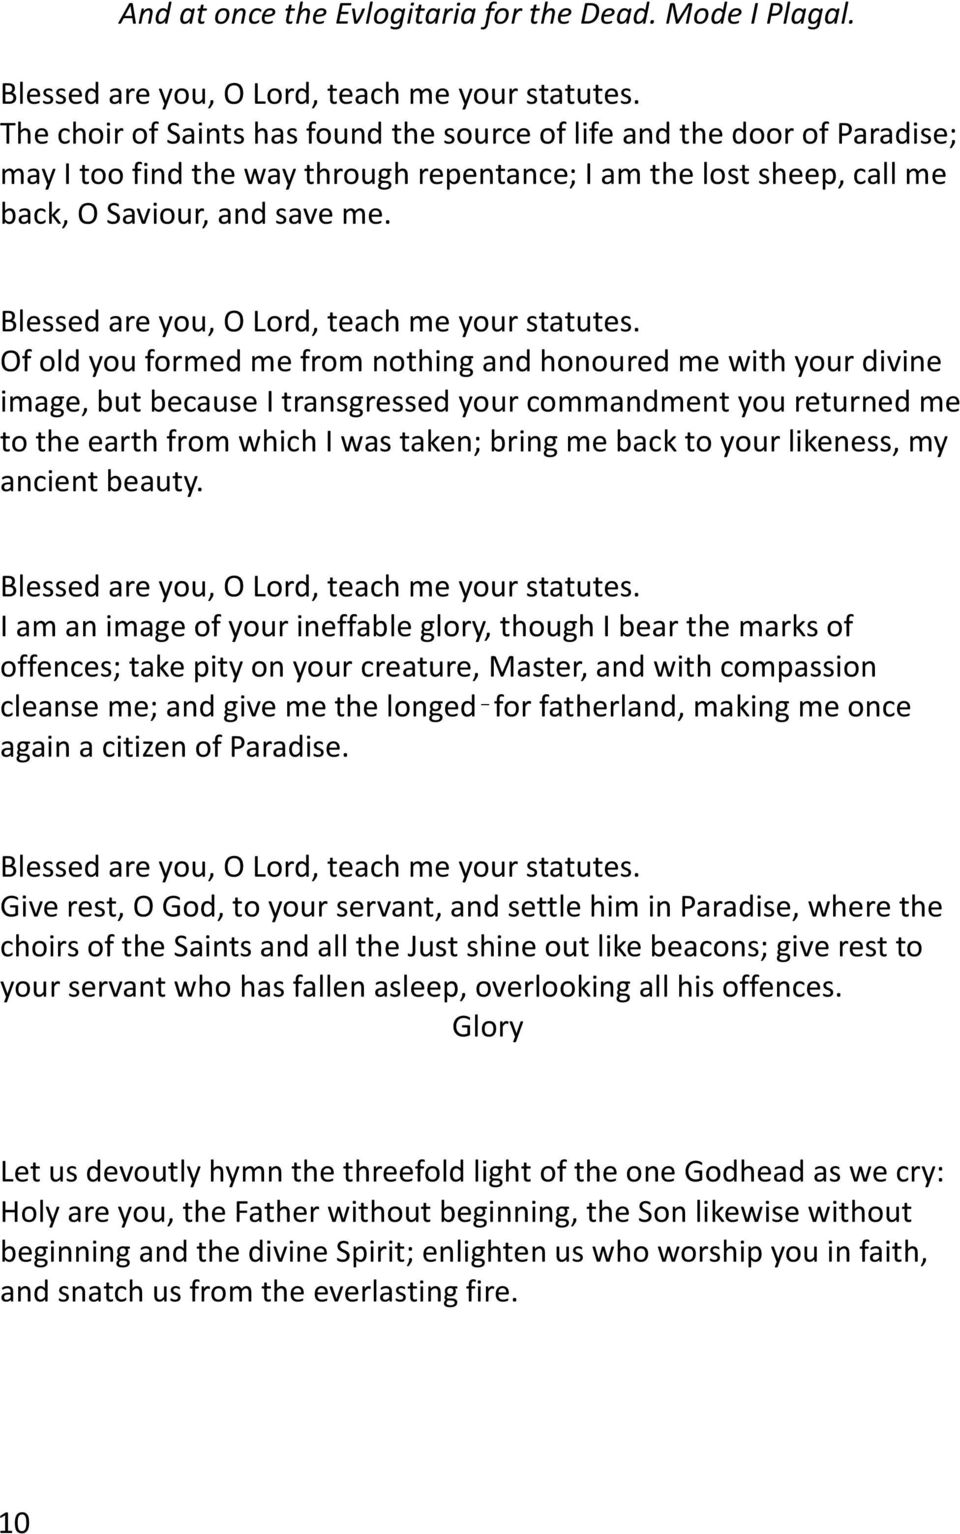 Blessed are you, O Lord, teach me your statutes.